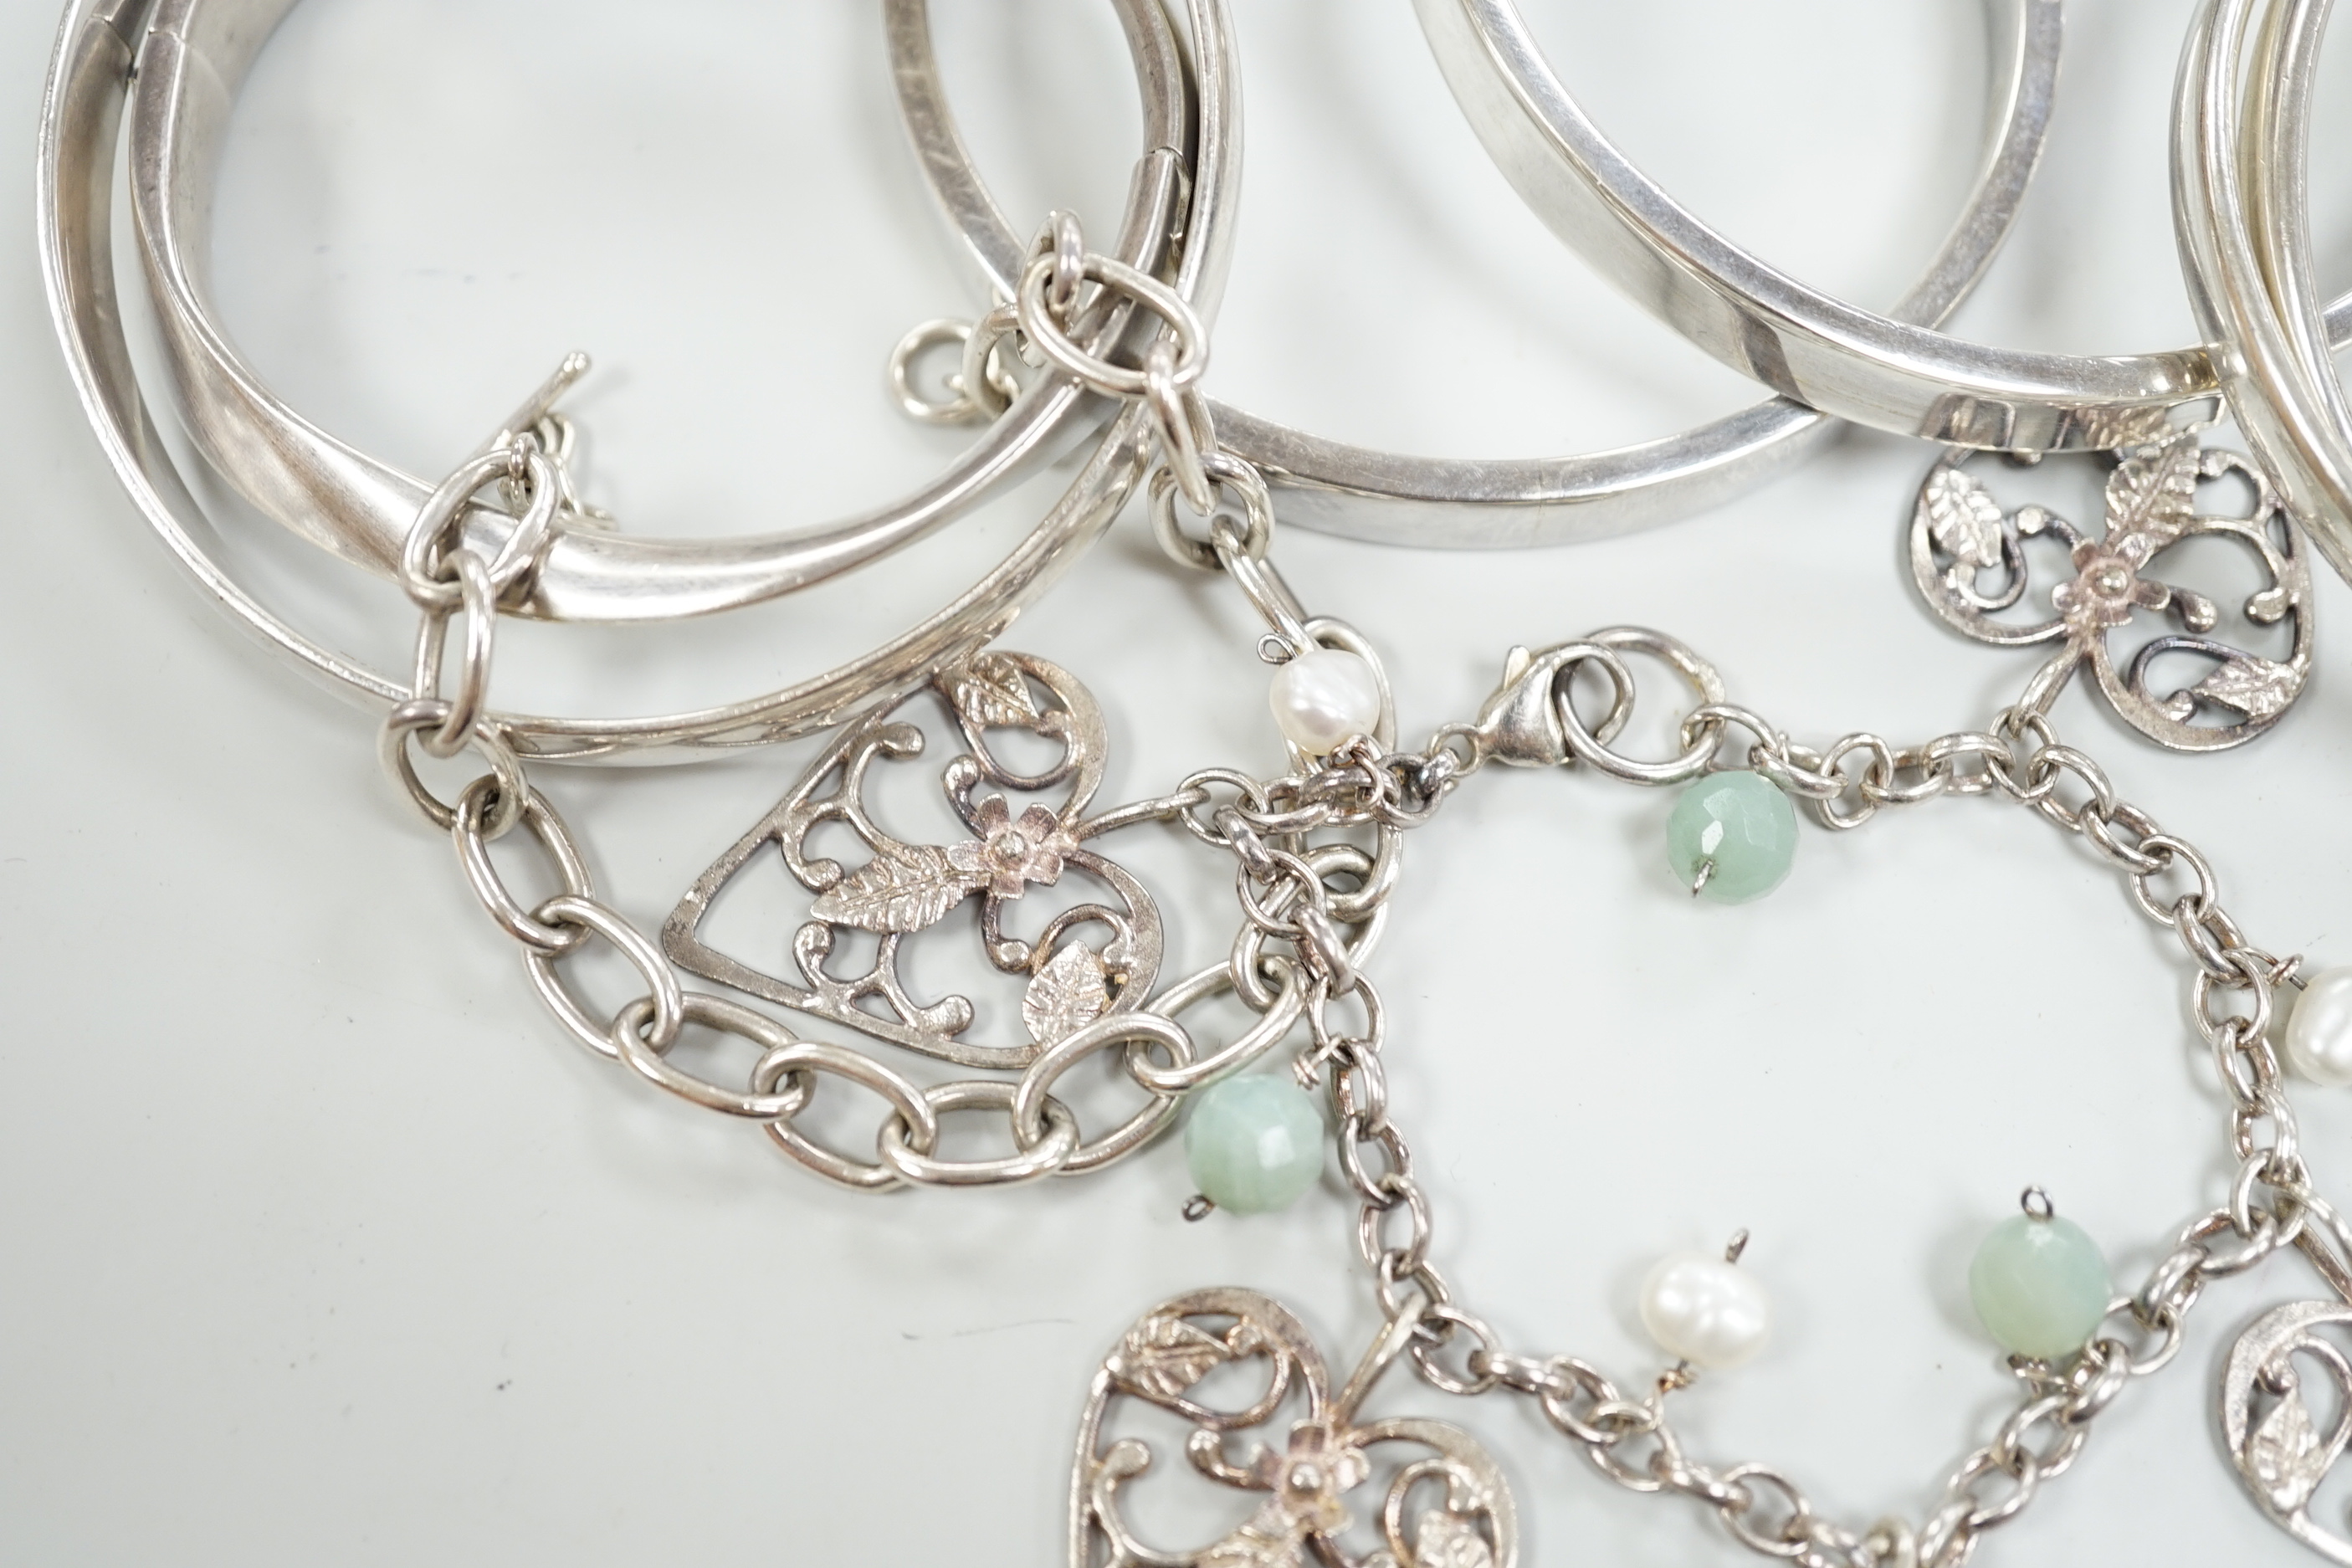 Three Pruden Smith bangles including triple loop, two other silver bangles, a white metal heart bracelet and one other bracelet, together with a straight edge rule by Mary Ann Simmons.